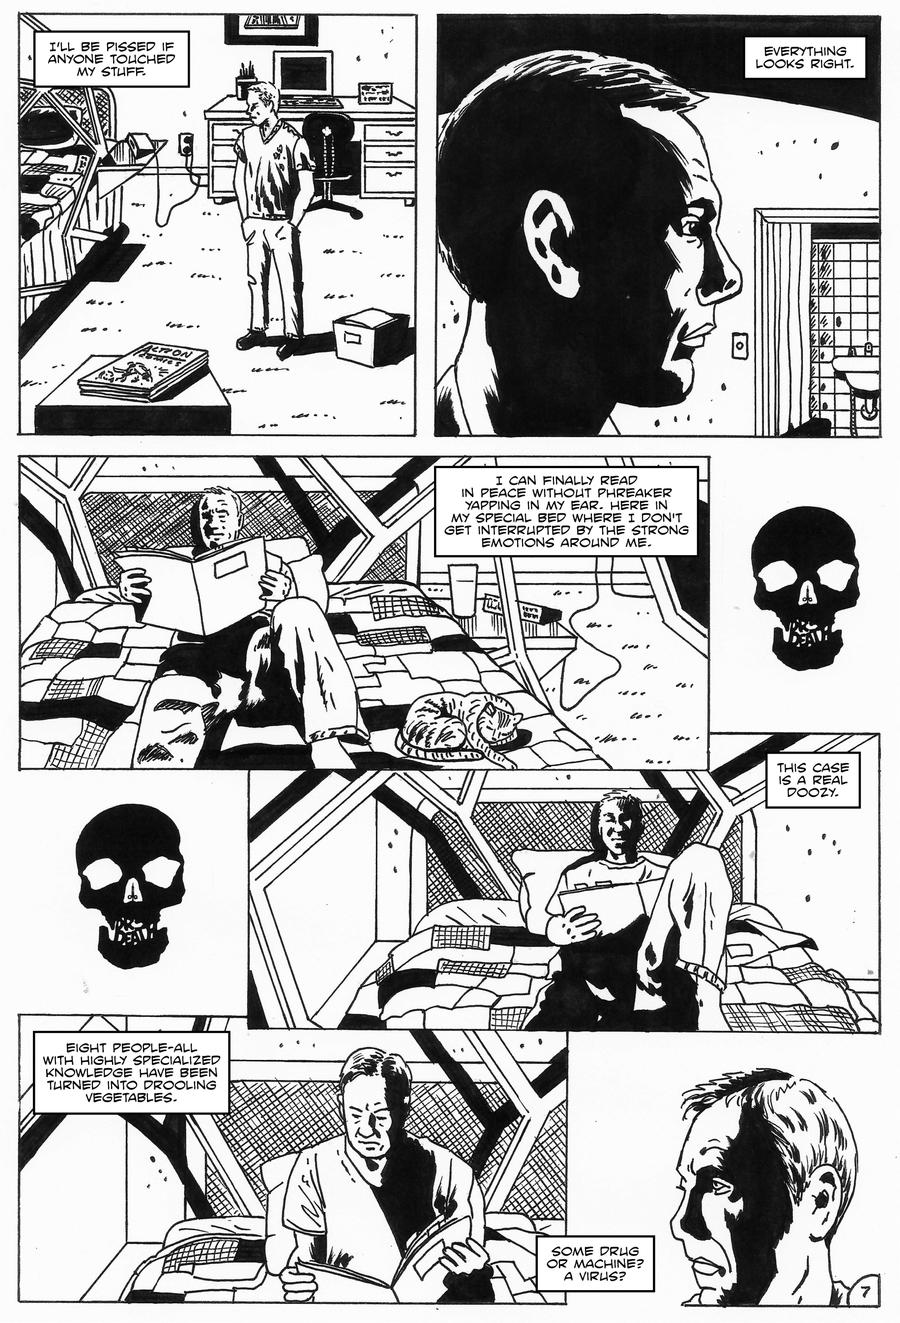 Dr Death vs Master Mind page 7 sequential art